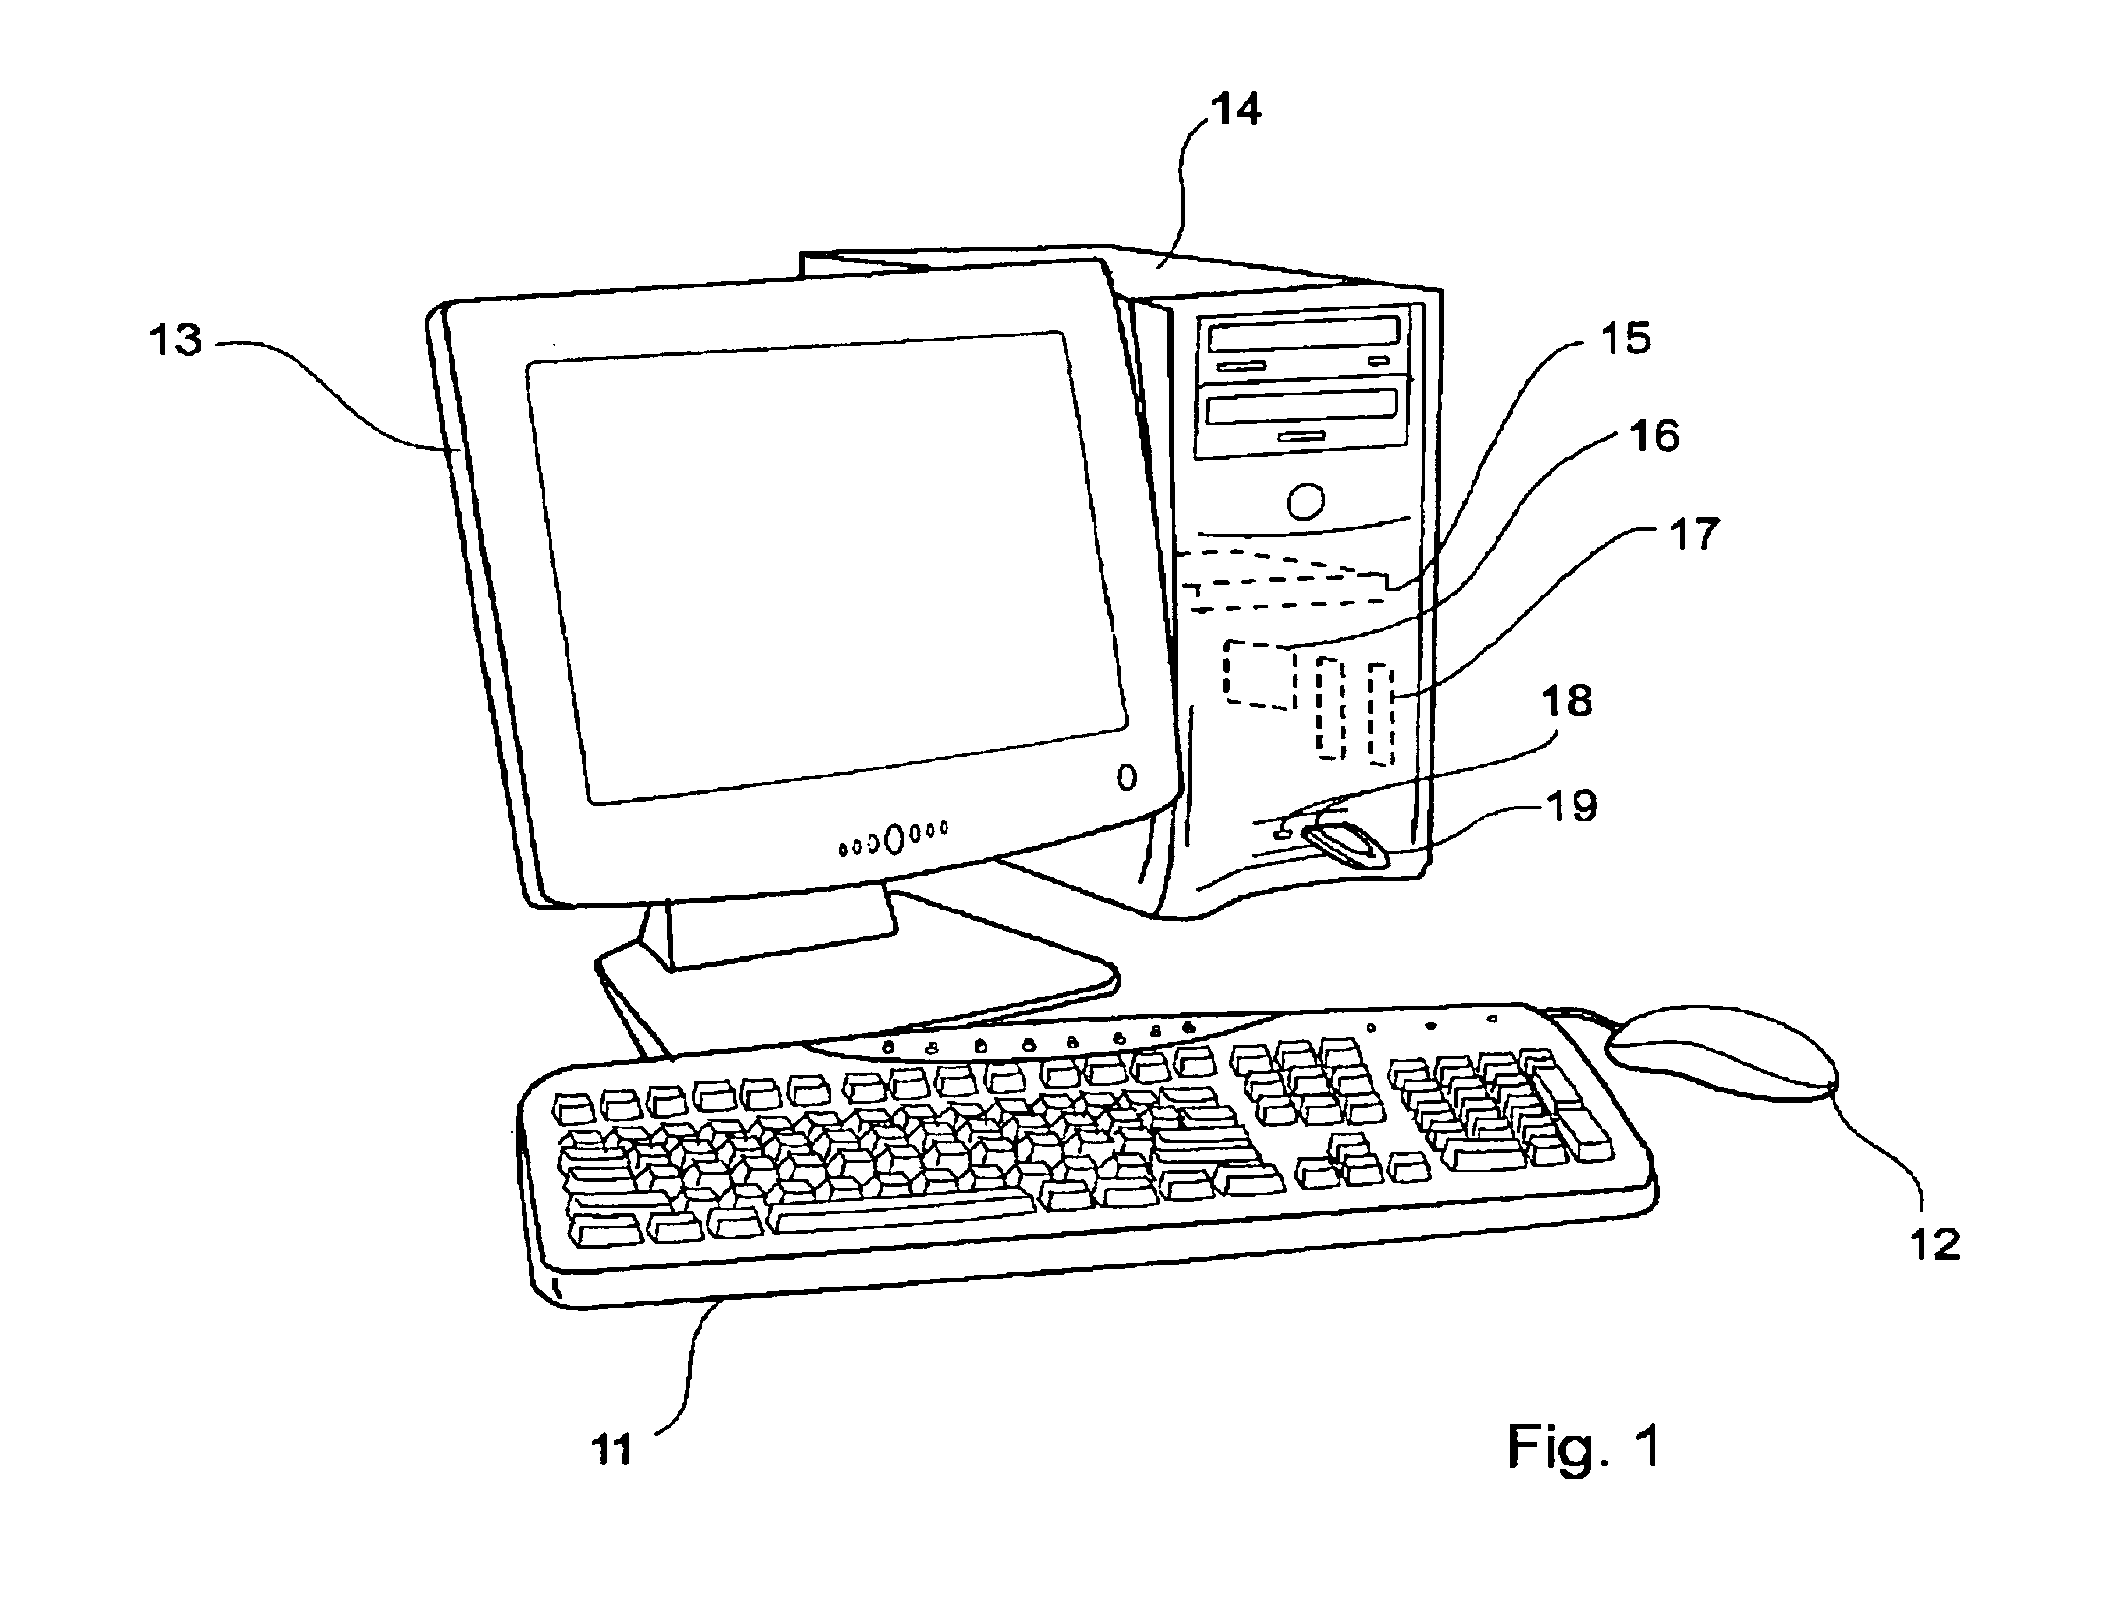 Method and system for installing portable executable applications